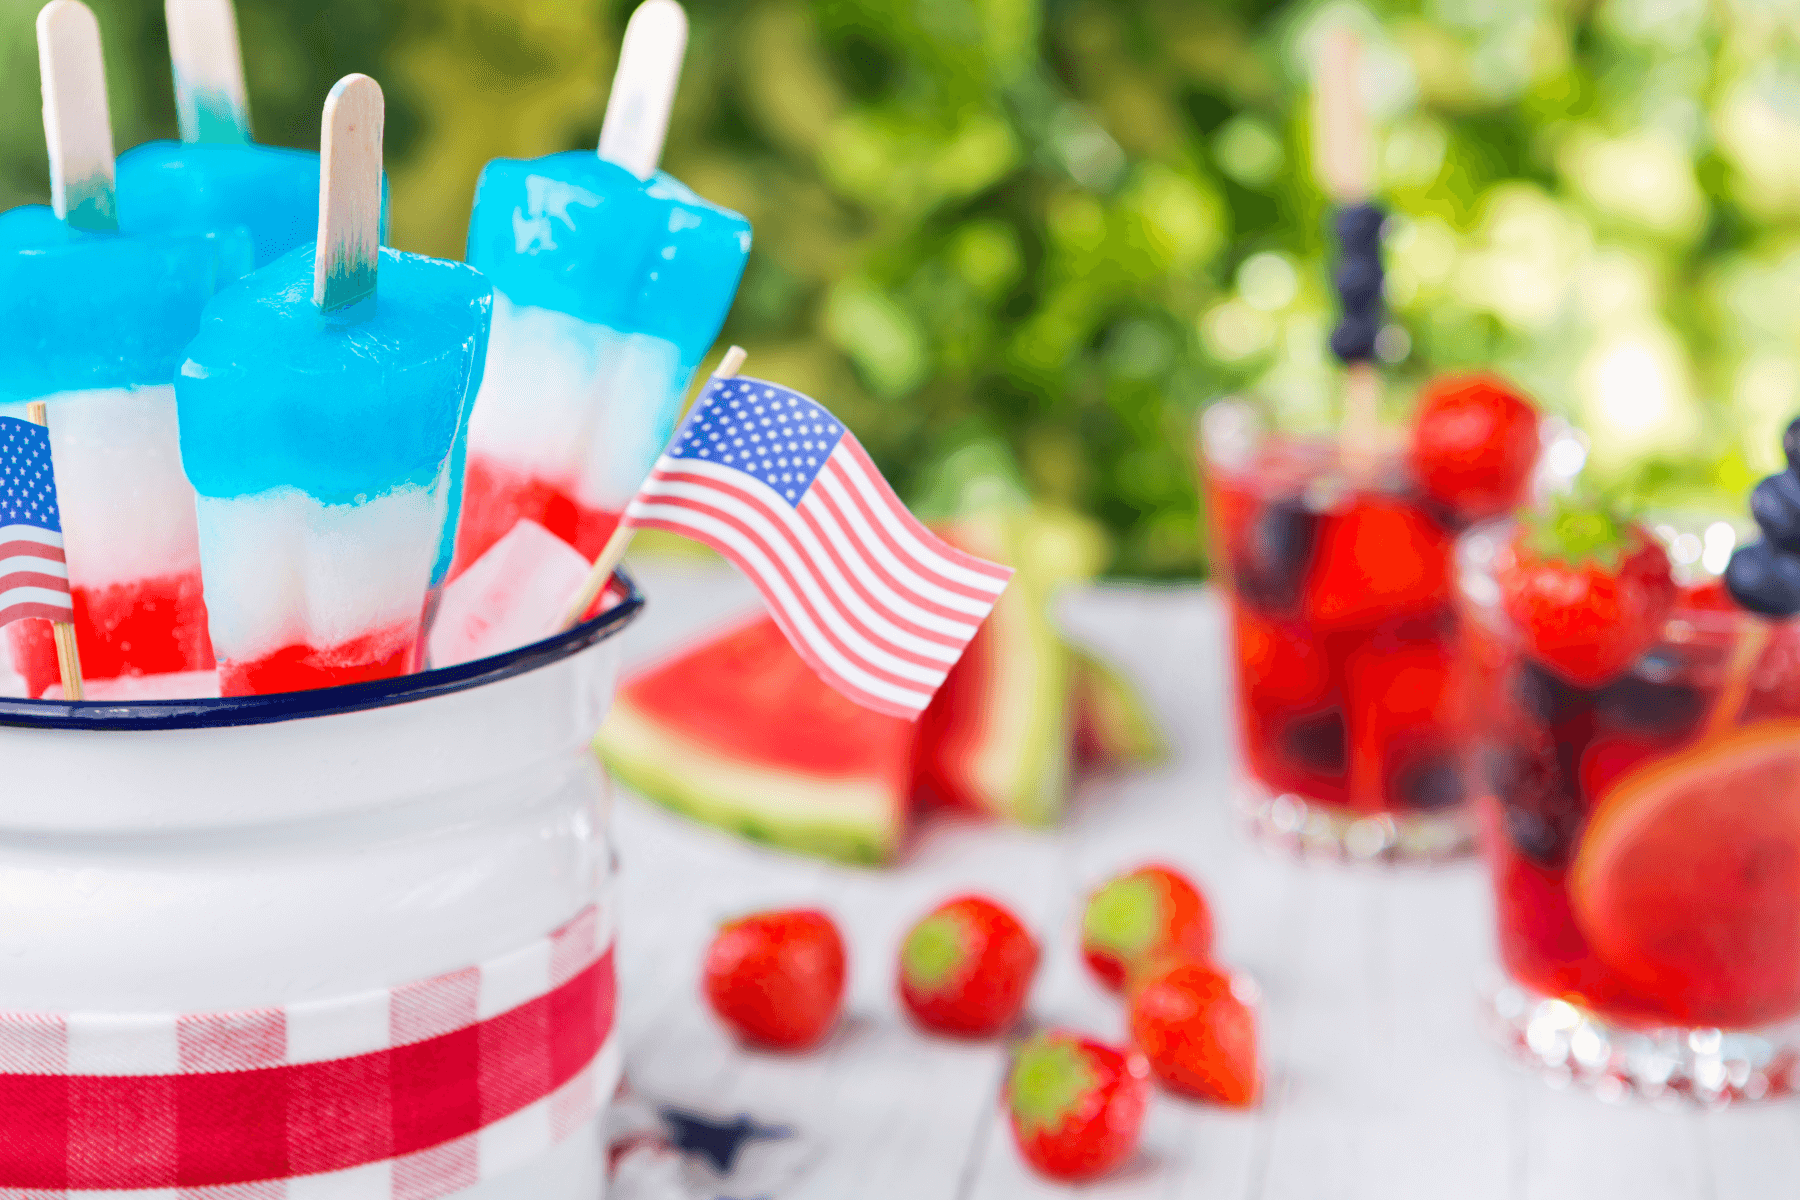 Red, white, and blue popsicles in a bucket with an American flag and strawberries, watermelon, and red fruity cocktails in the background.